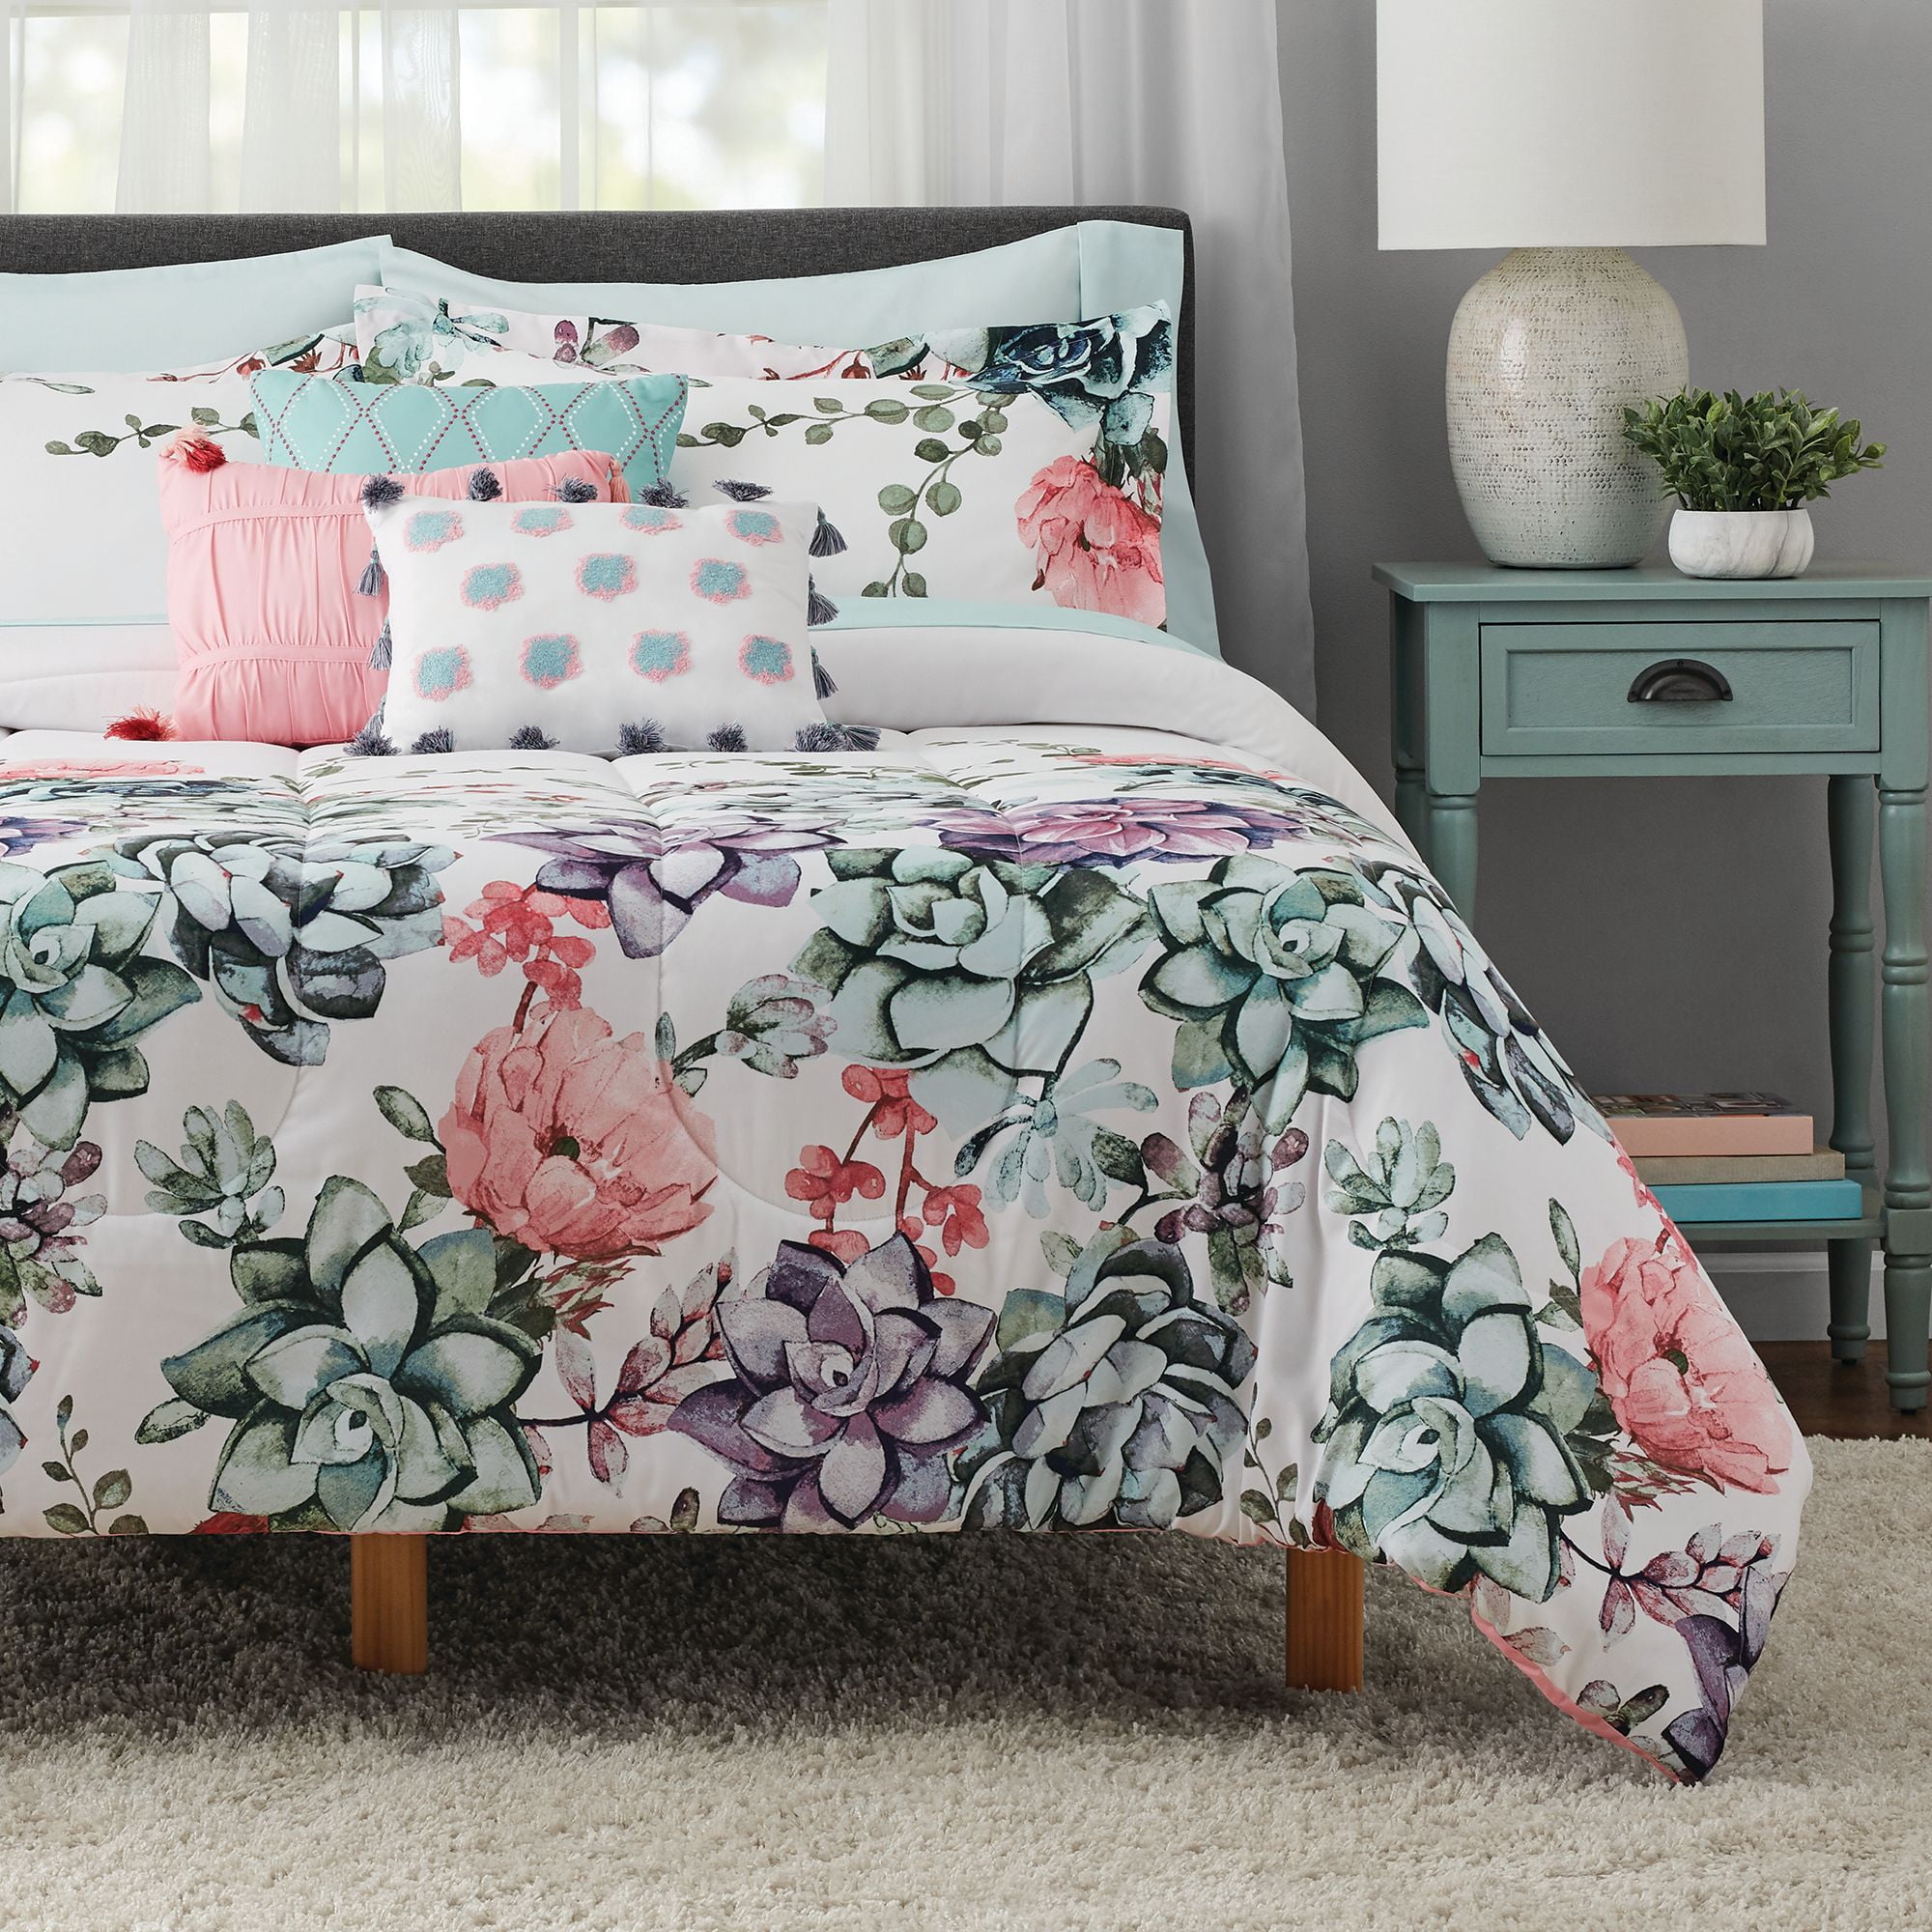 7 Pieces Floral Bedding Comforter Sets,Grey King Size Comforter Set with Sheets Bed-in-A-Bag Wellbeing King Size Comforter